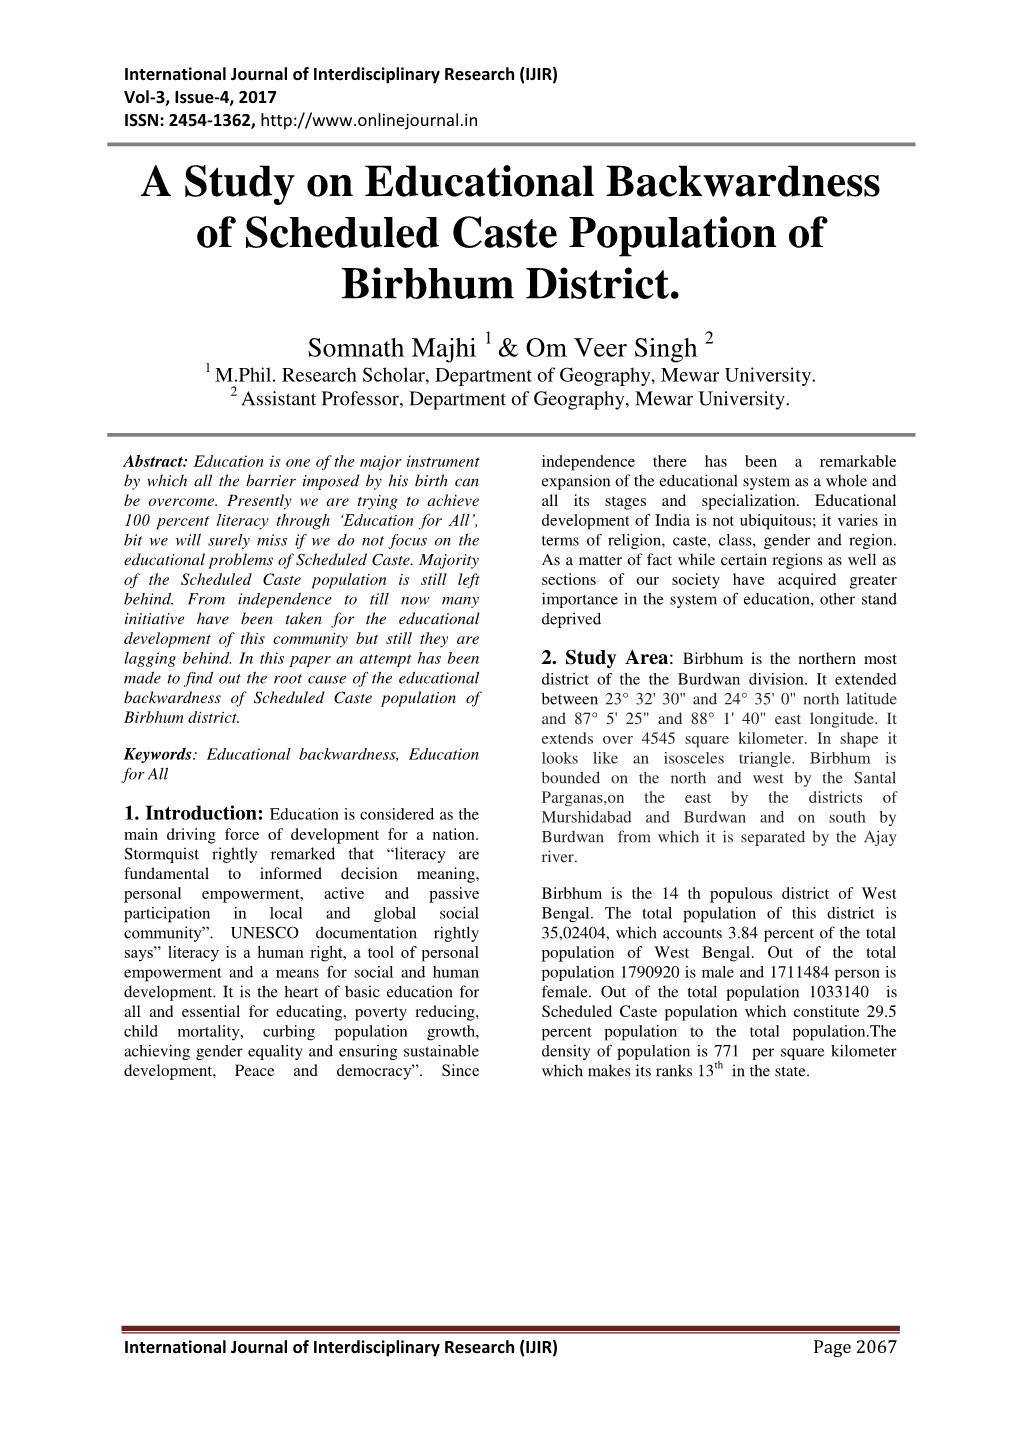 A Study on Educational Backwardness of Scheduled Caste Population of Birbhum District